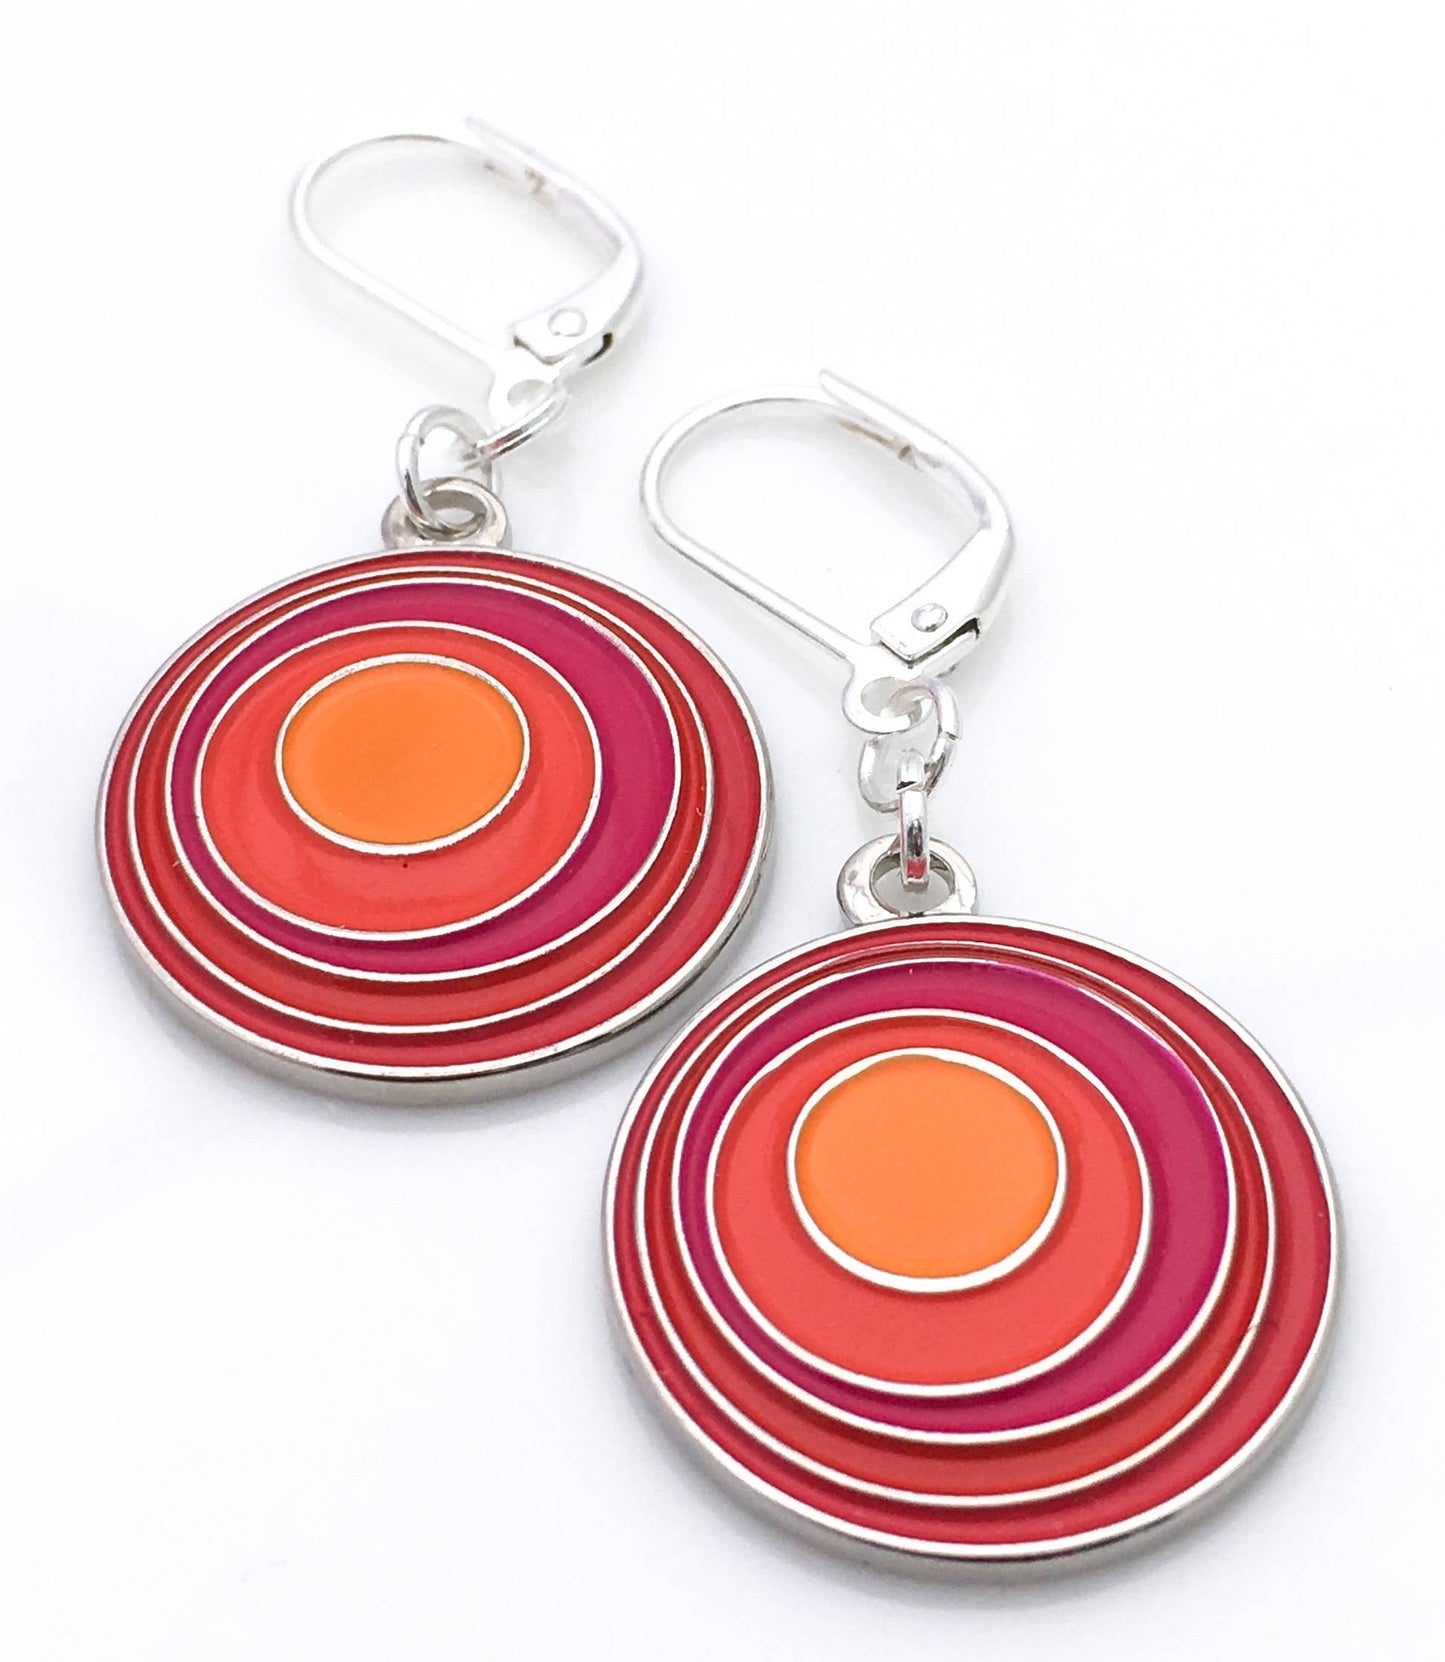 Round earrings with circles within circles in oranges